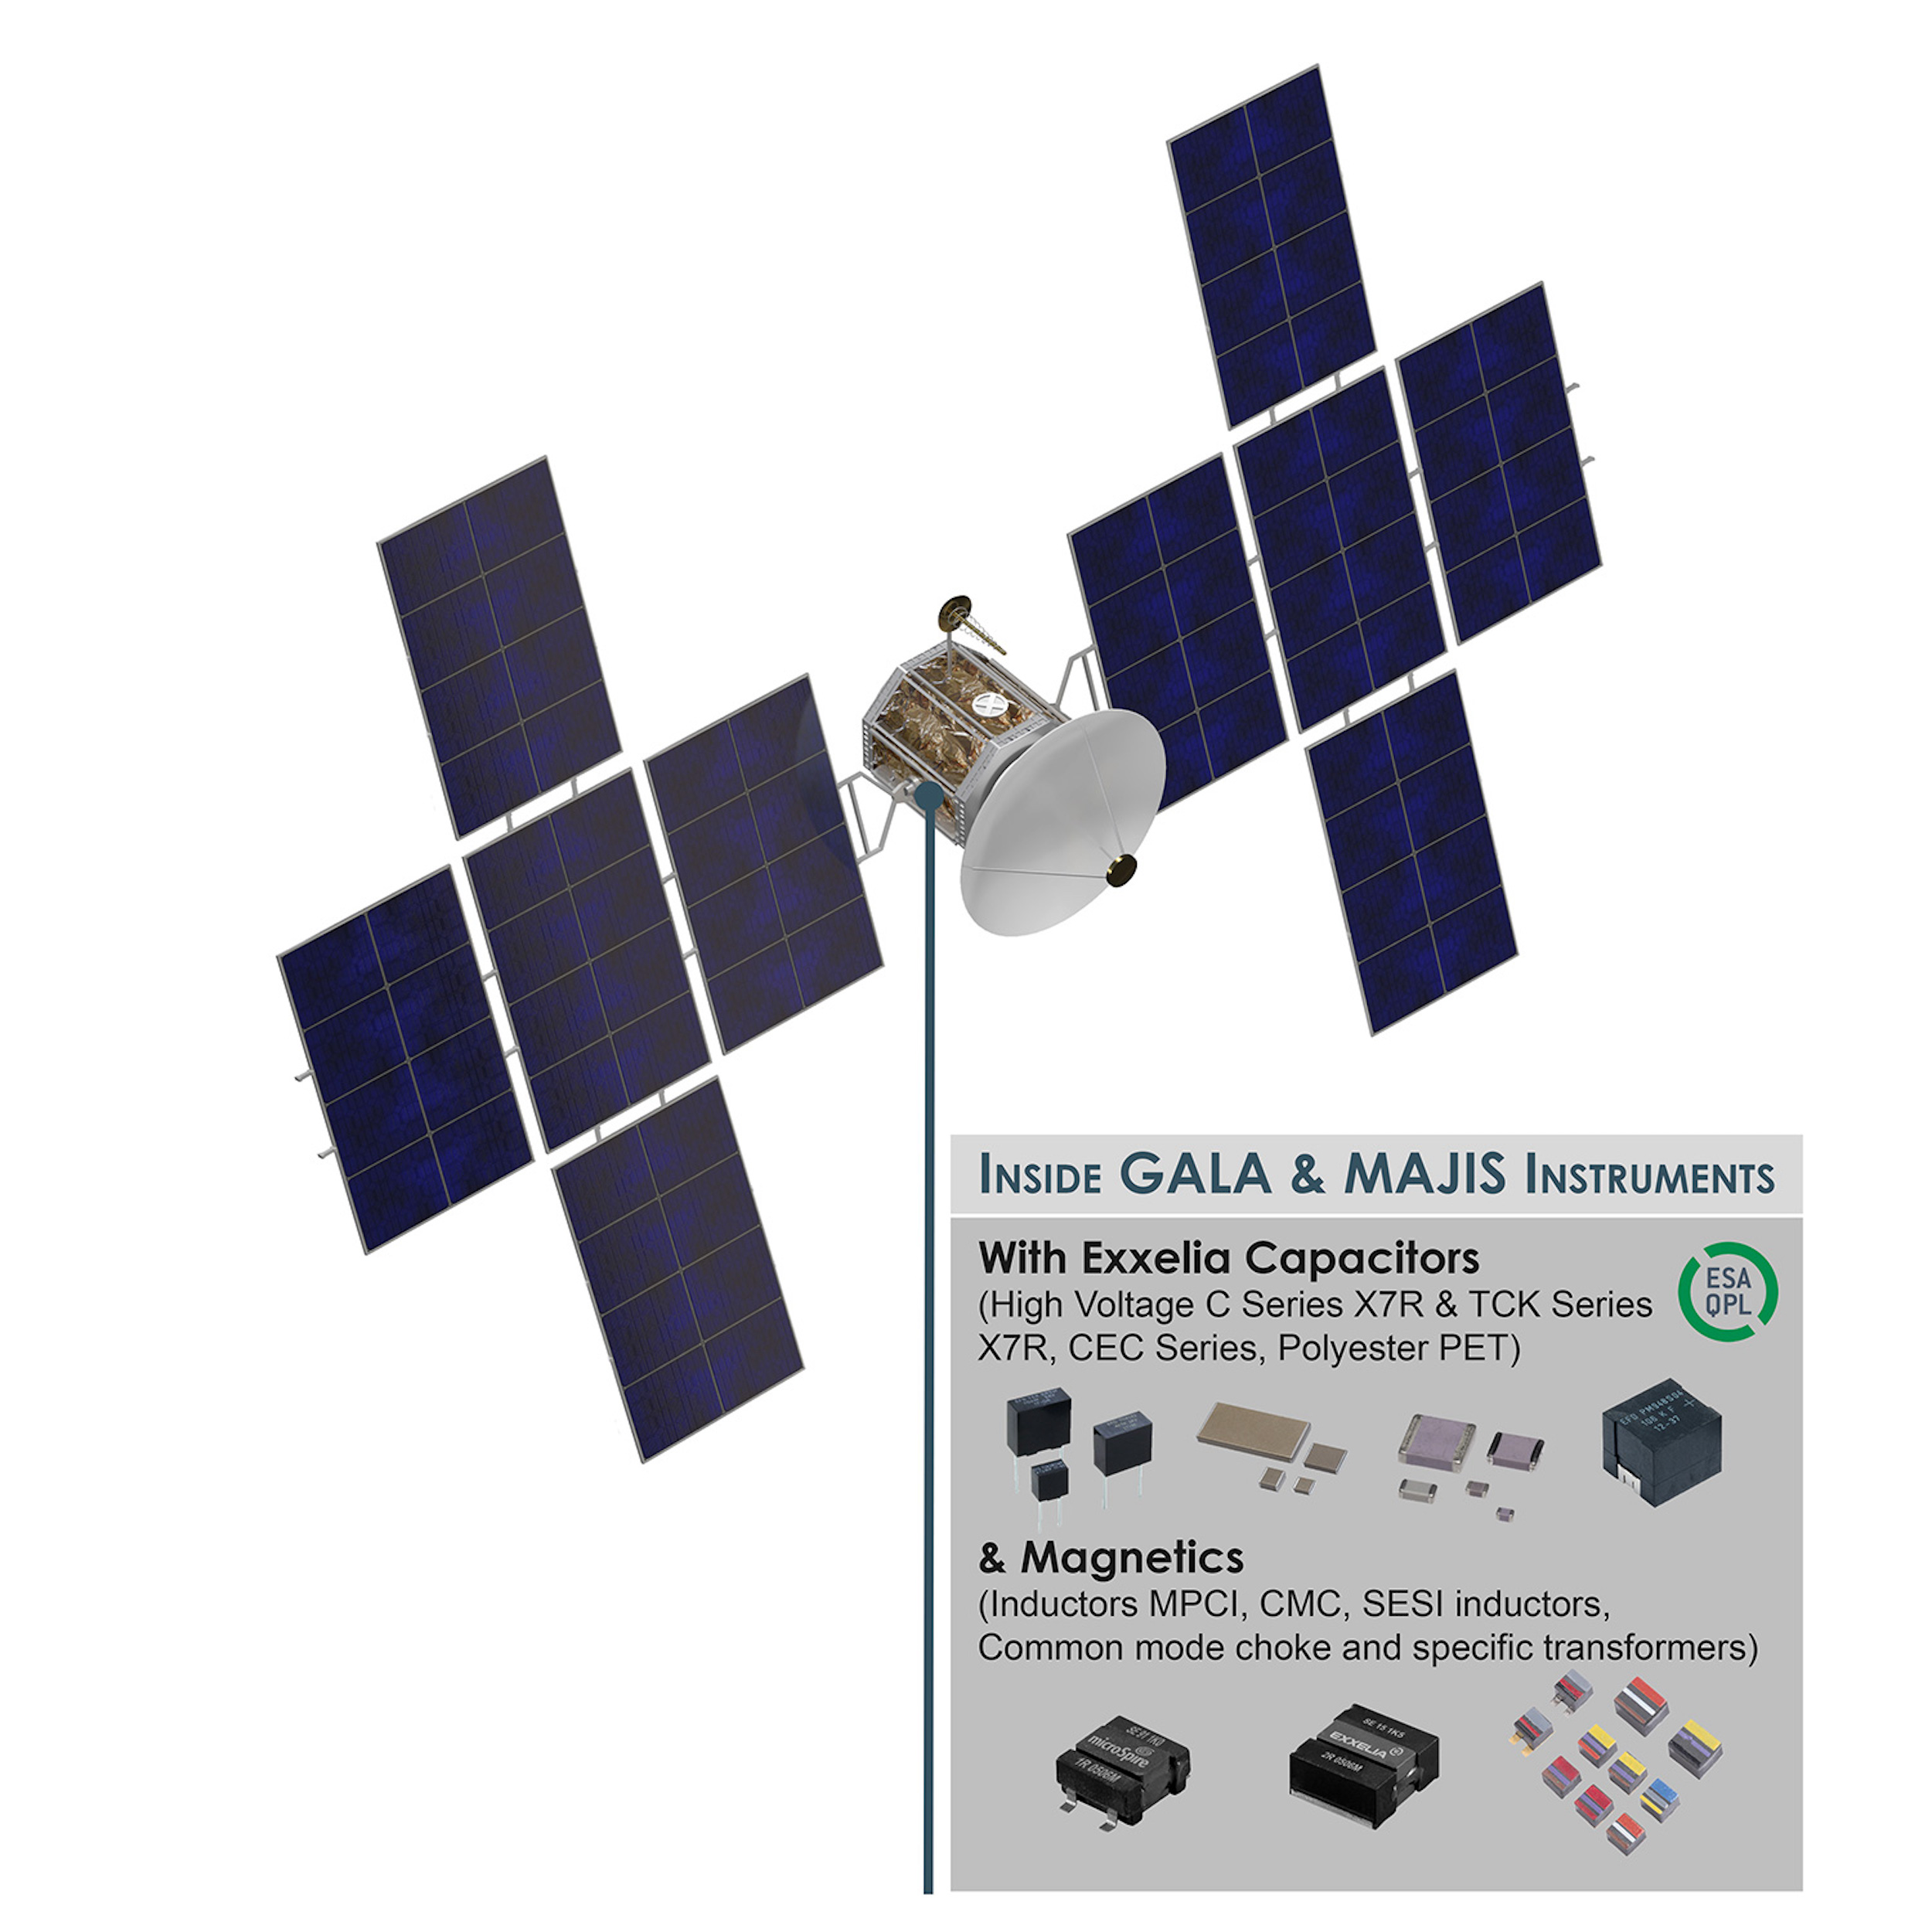 JUICE Mission to Jupiter: Exxelia high reliability passive components ready to withstand extreme space conditions